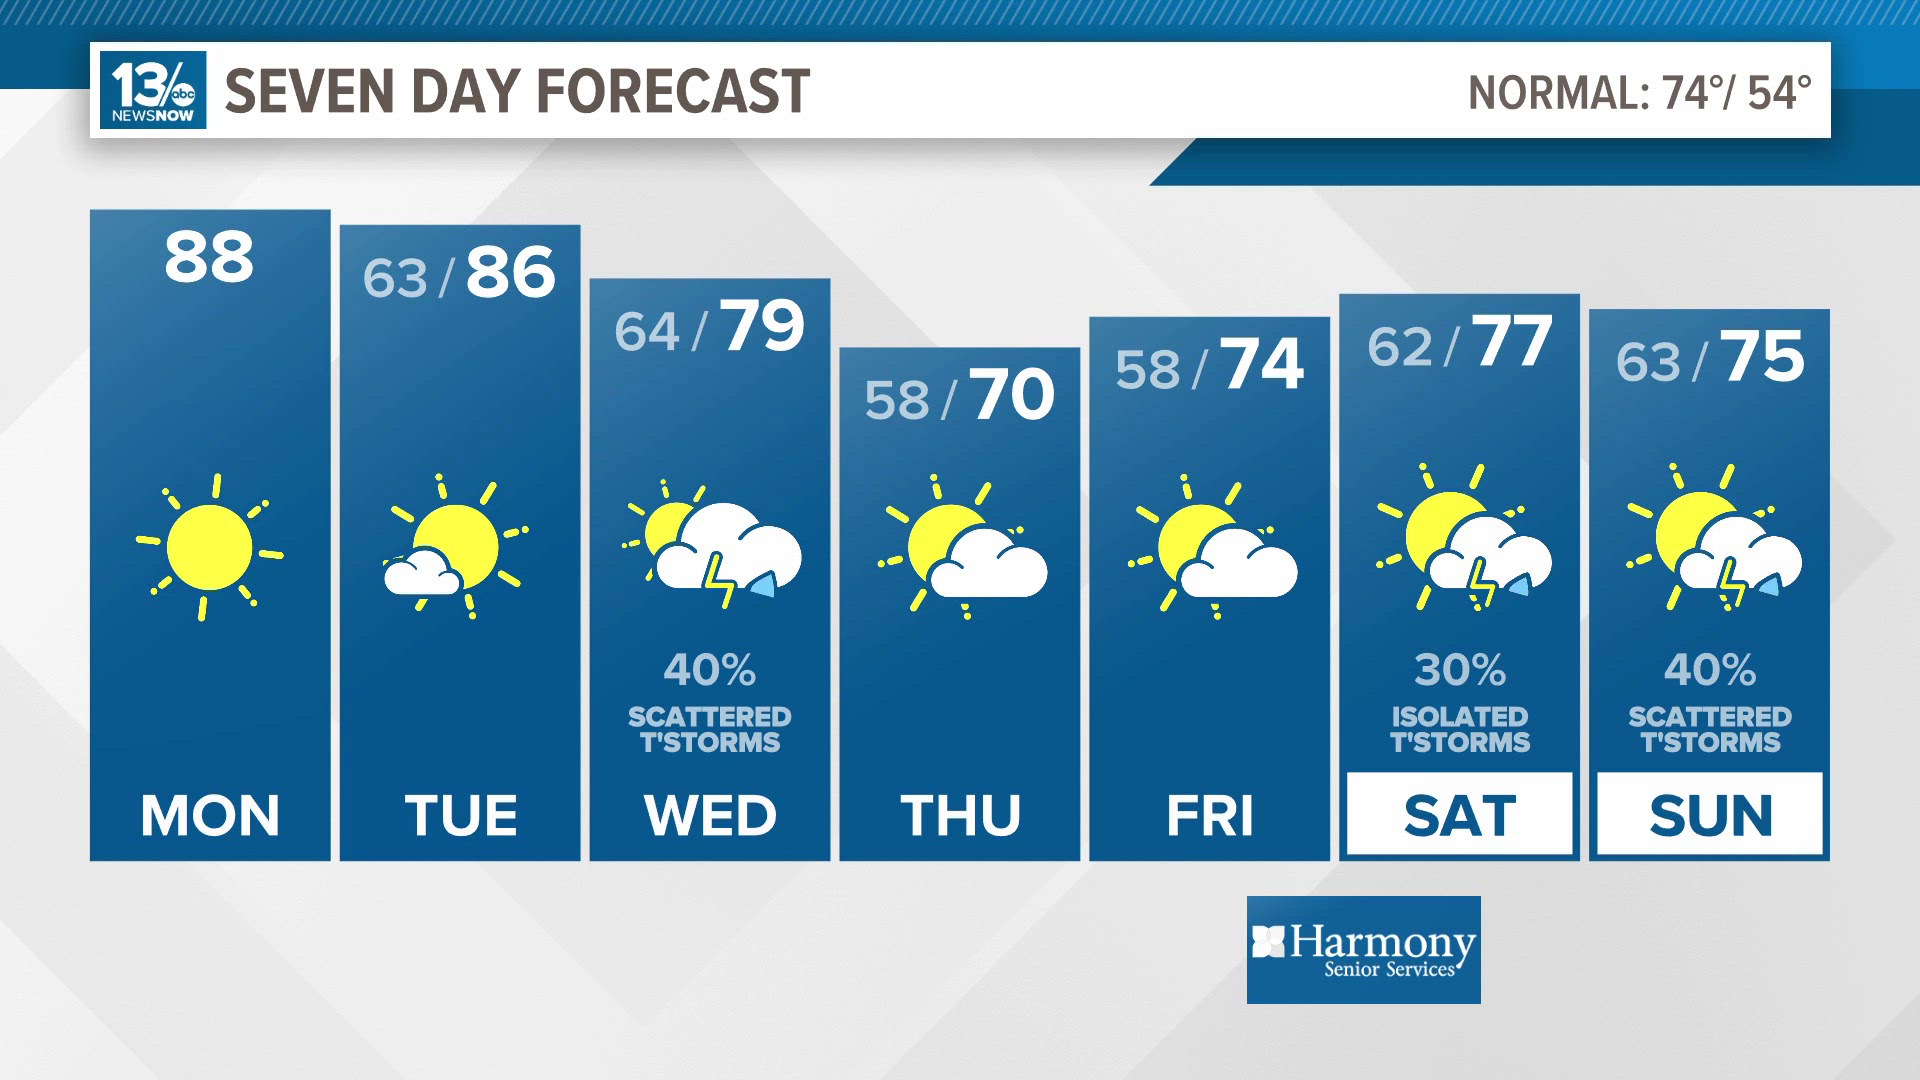 Dry and very warm weather starts the new week, but rain chances will build by Wednesday.